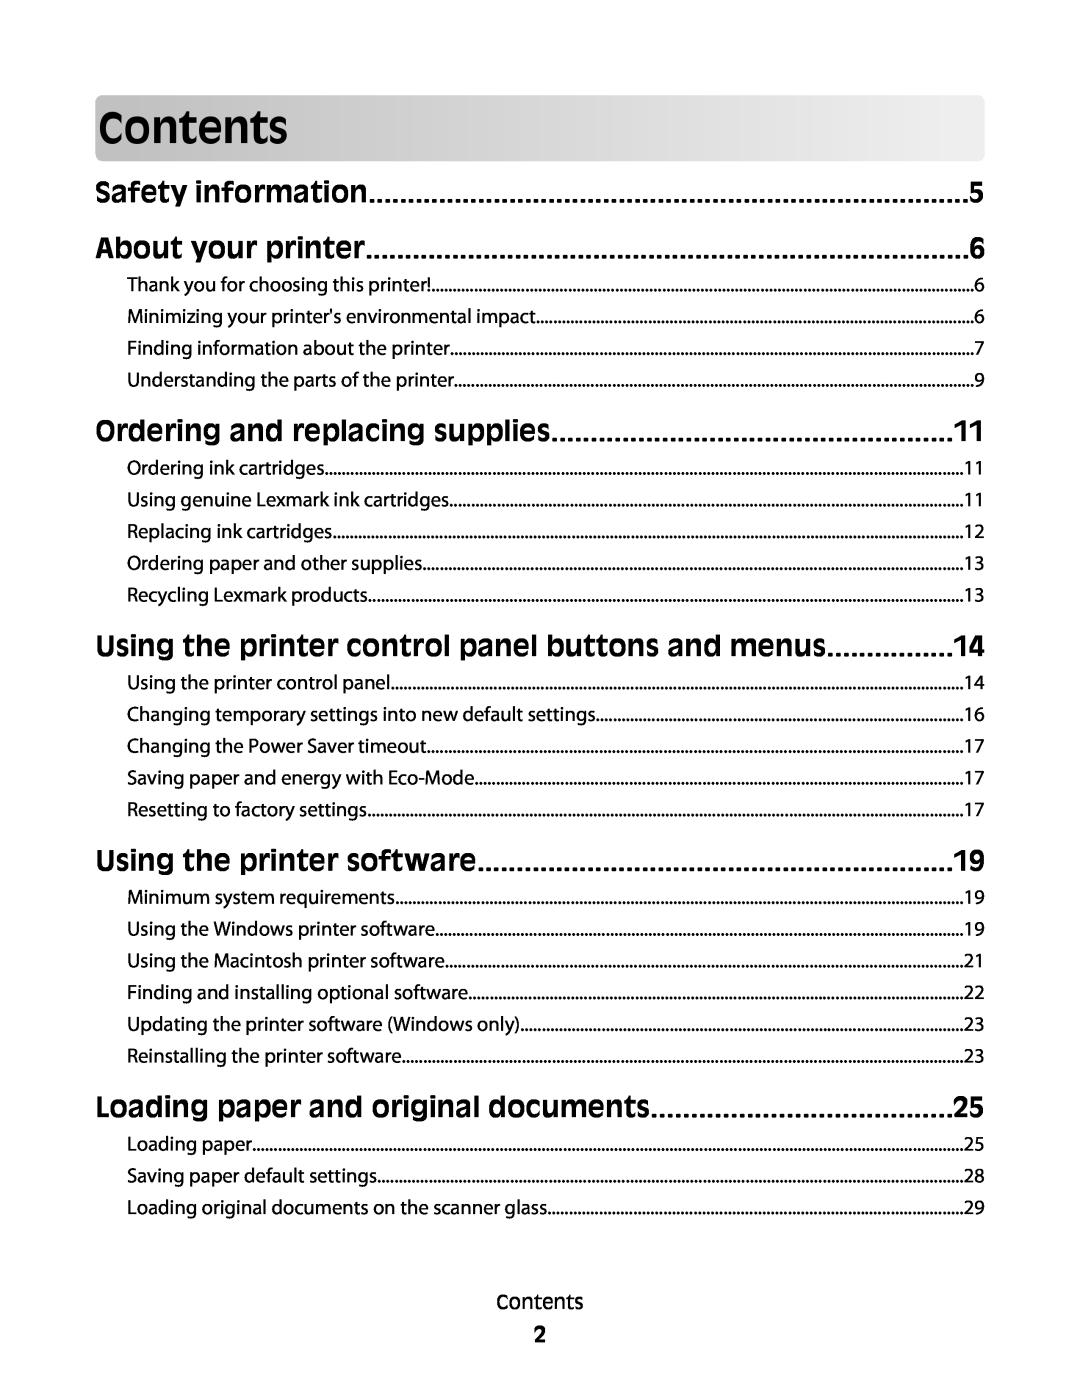 Lexmark 301 Contents, Safety information, About your printer, Ordering and replacing supplies, Using the printer software 